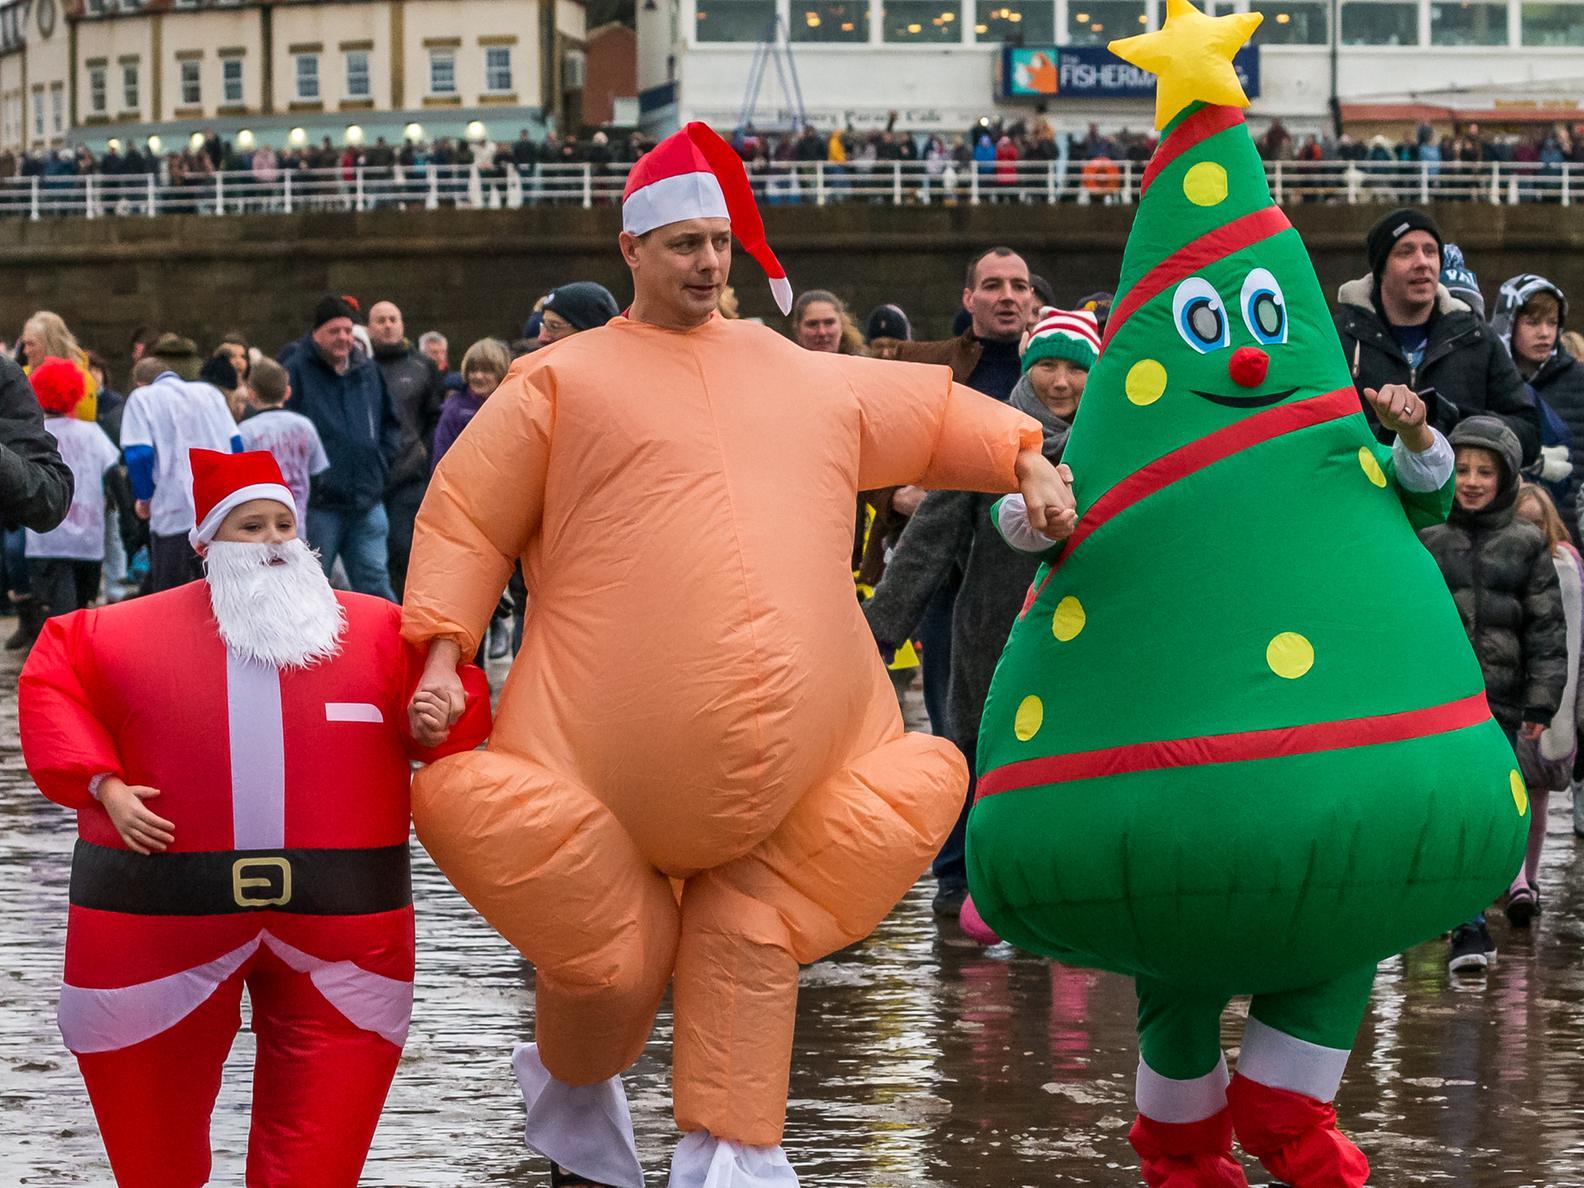 Santa, a turkey, even a Christmas tree, taking part in the dip.